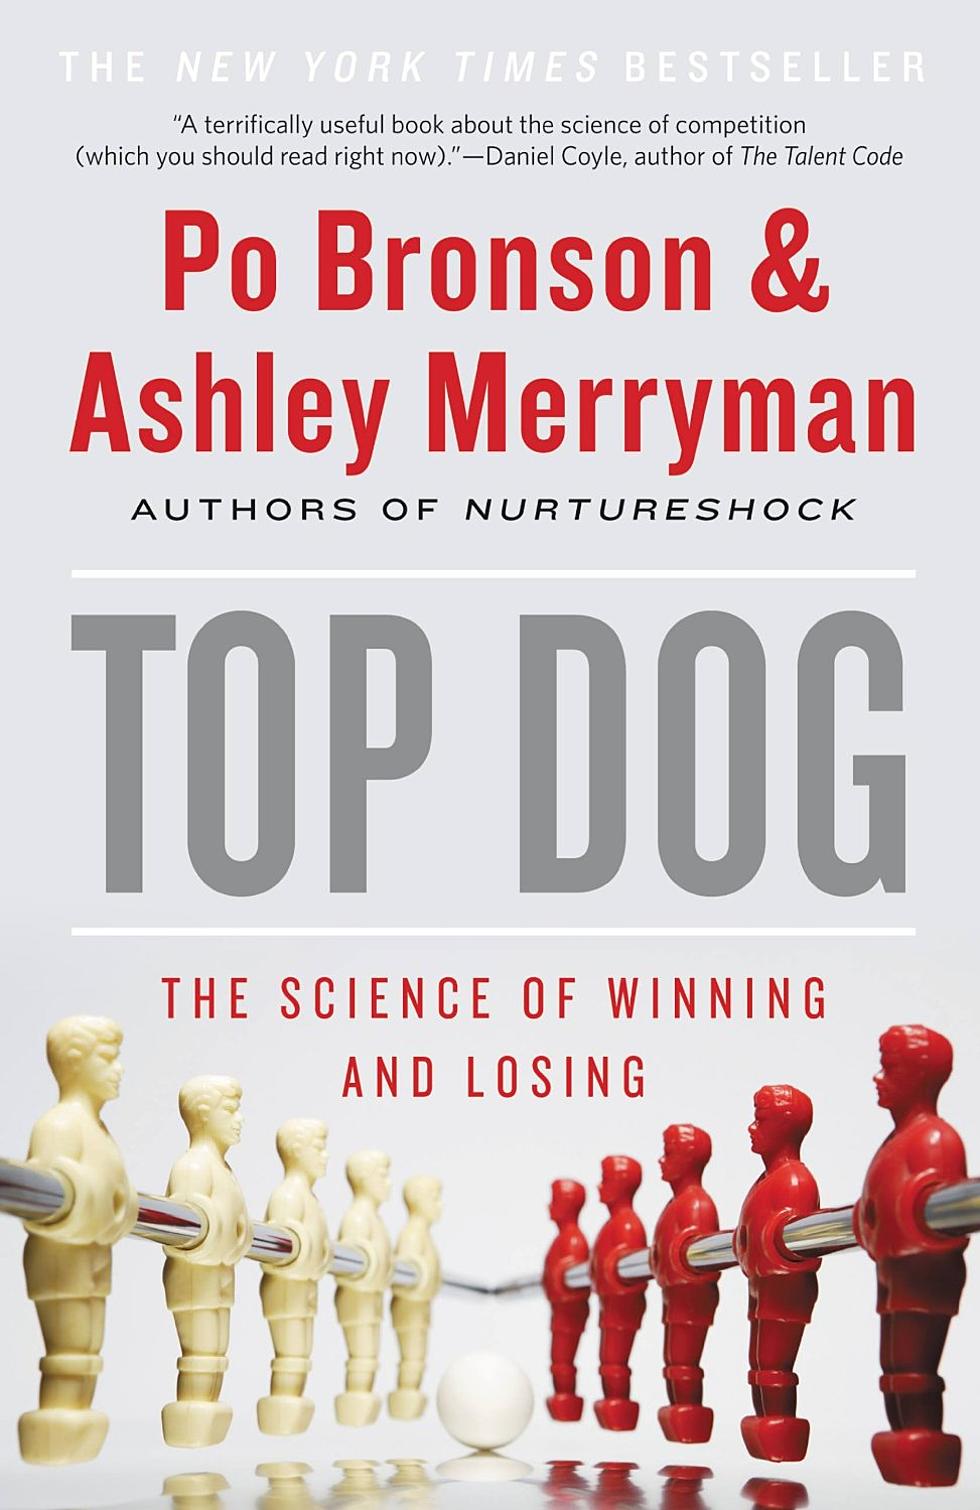 Author Ashley Merryman Explains Why Losing Is Good For Children [AUDIO]